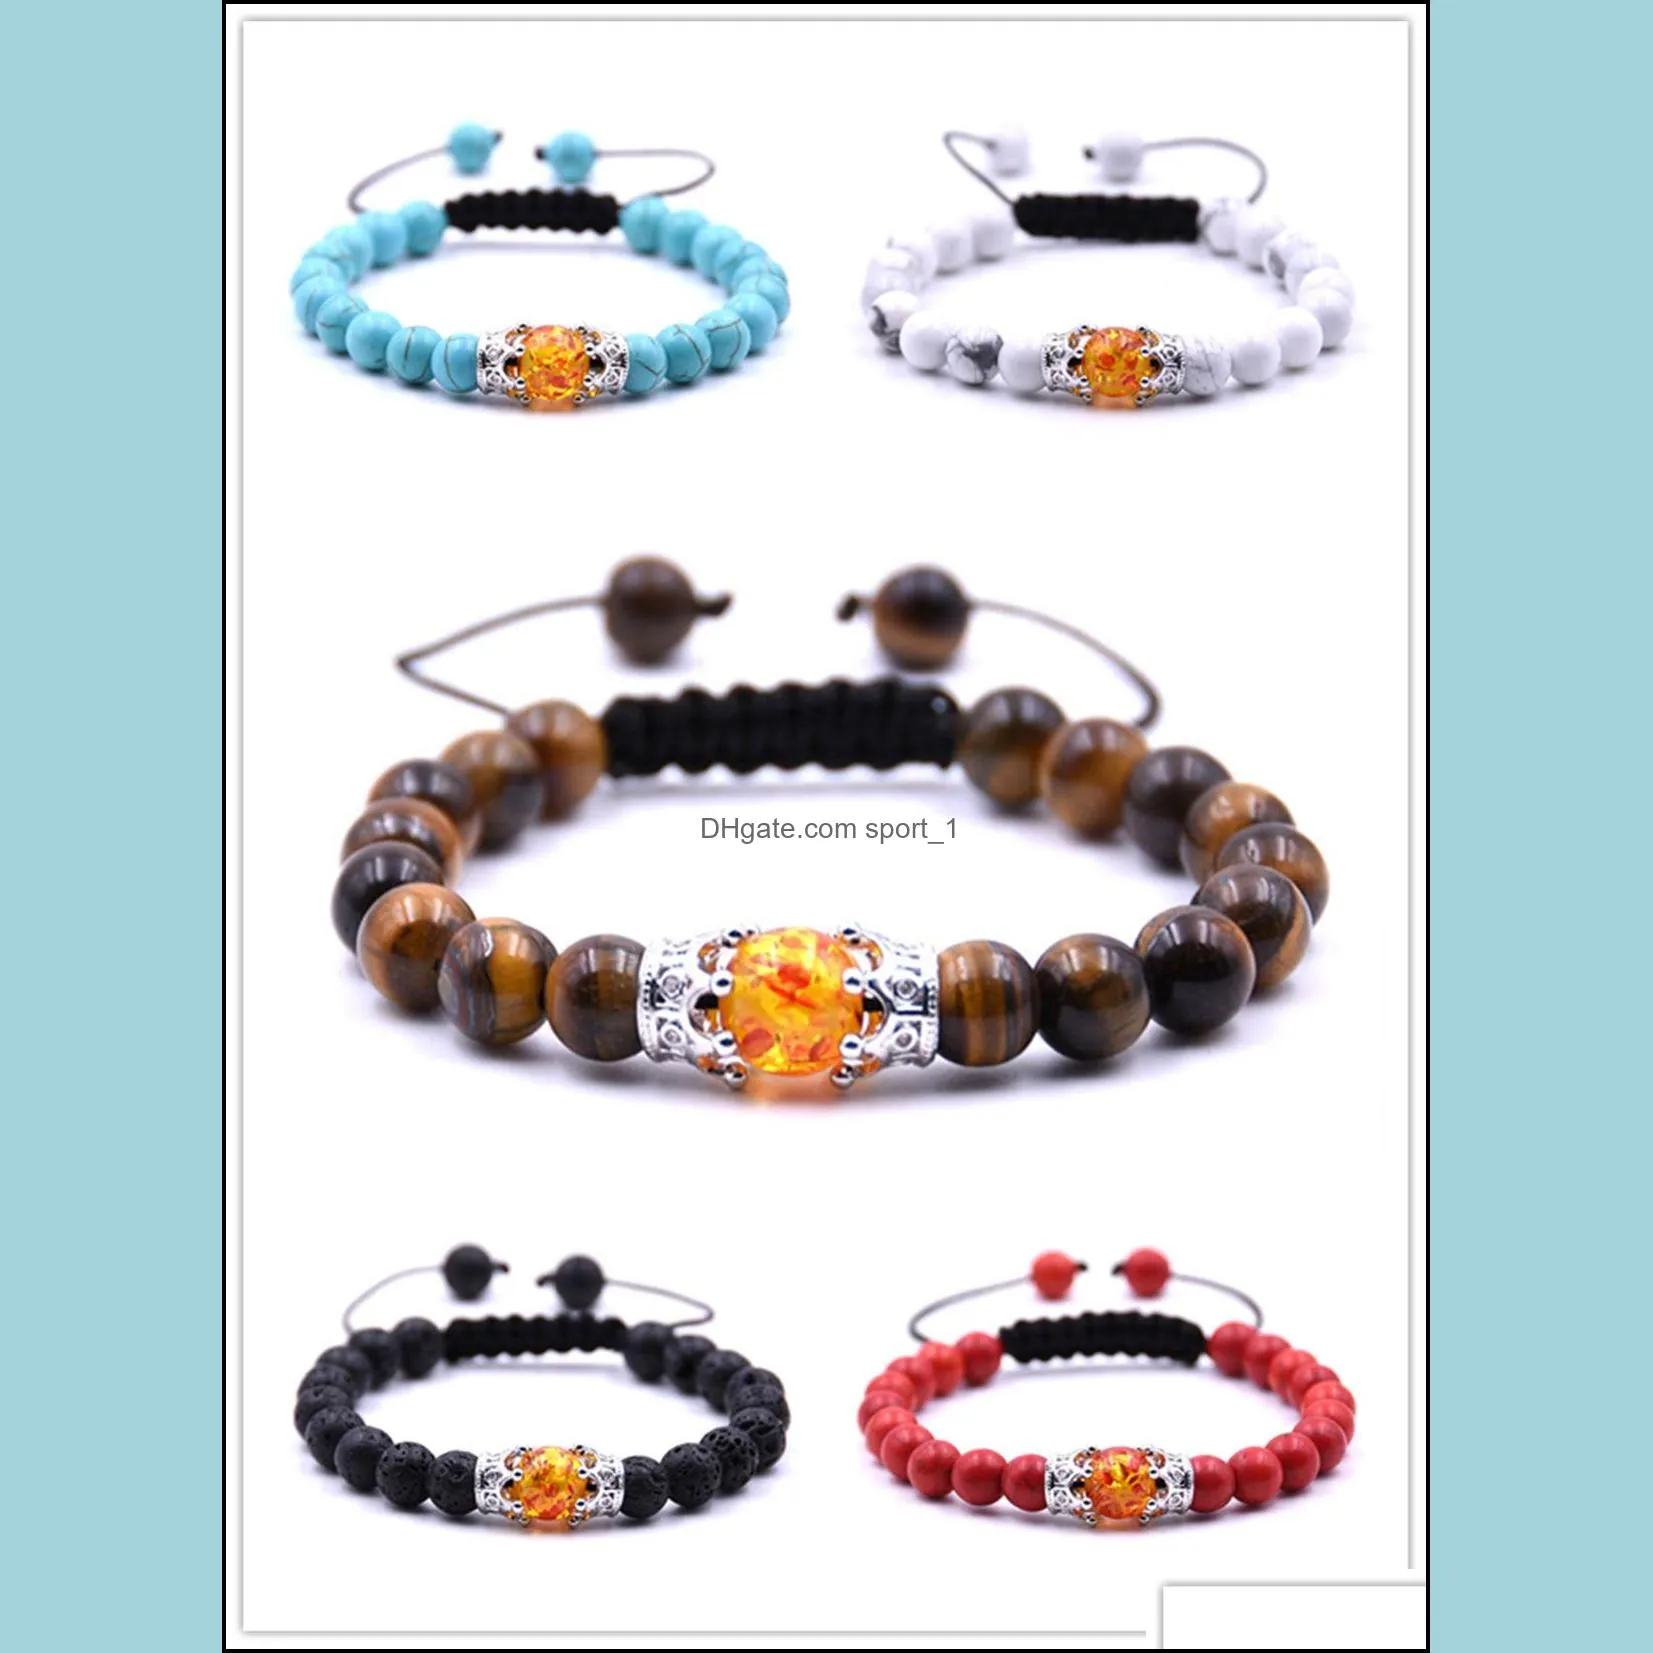 10pc/set jewelry handmade woven bracelets strands adjustable turquoise amber beaded bracelet with double crown for men and women